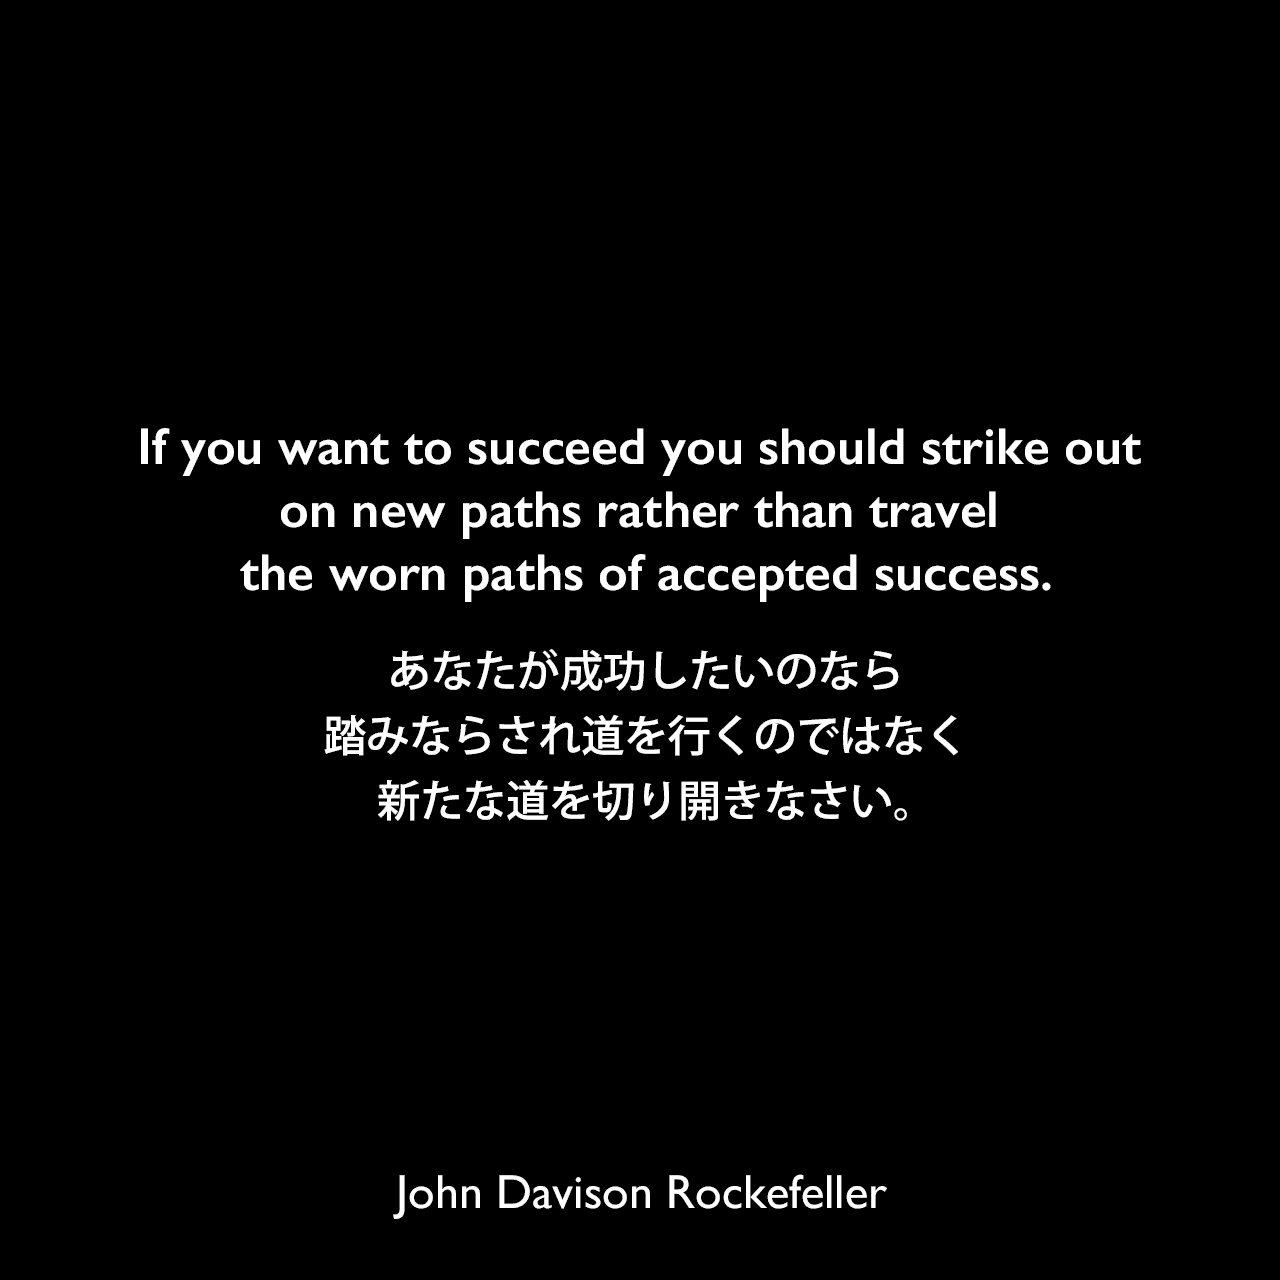 If you want to succeed you should strike out on new paths rather than travel the worn paths of accepted success.あなたが成功したいのなら、踏みならされ道を行くのではなく、新たな道を切り開きなさい。John Davison Rockefeller